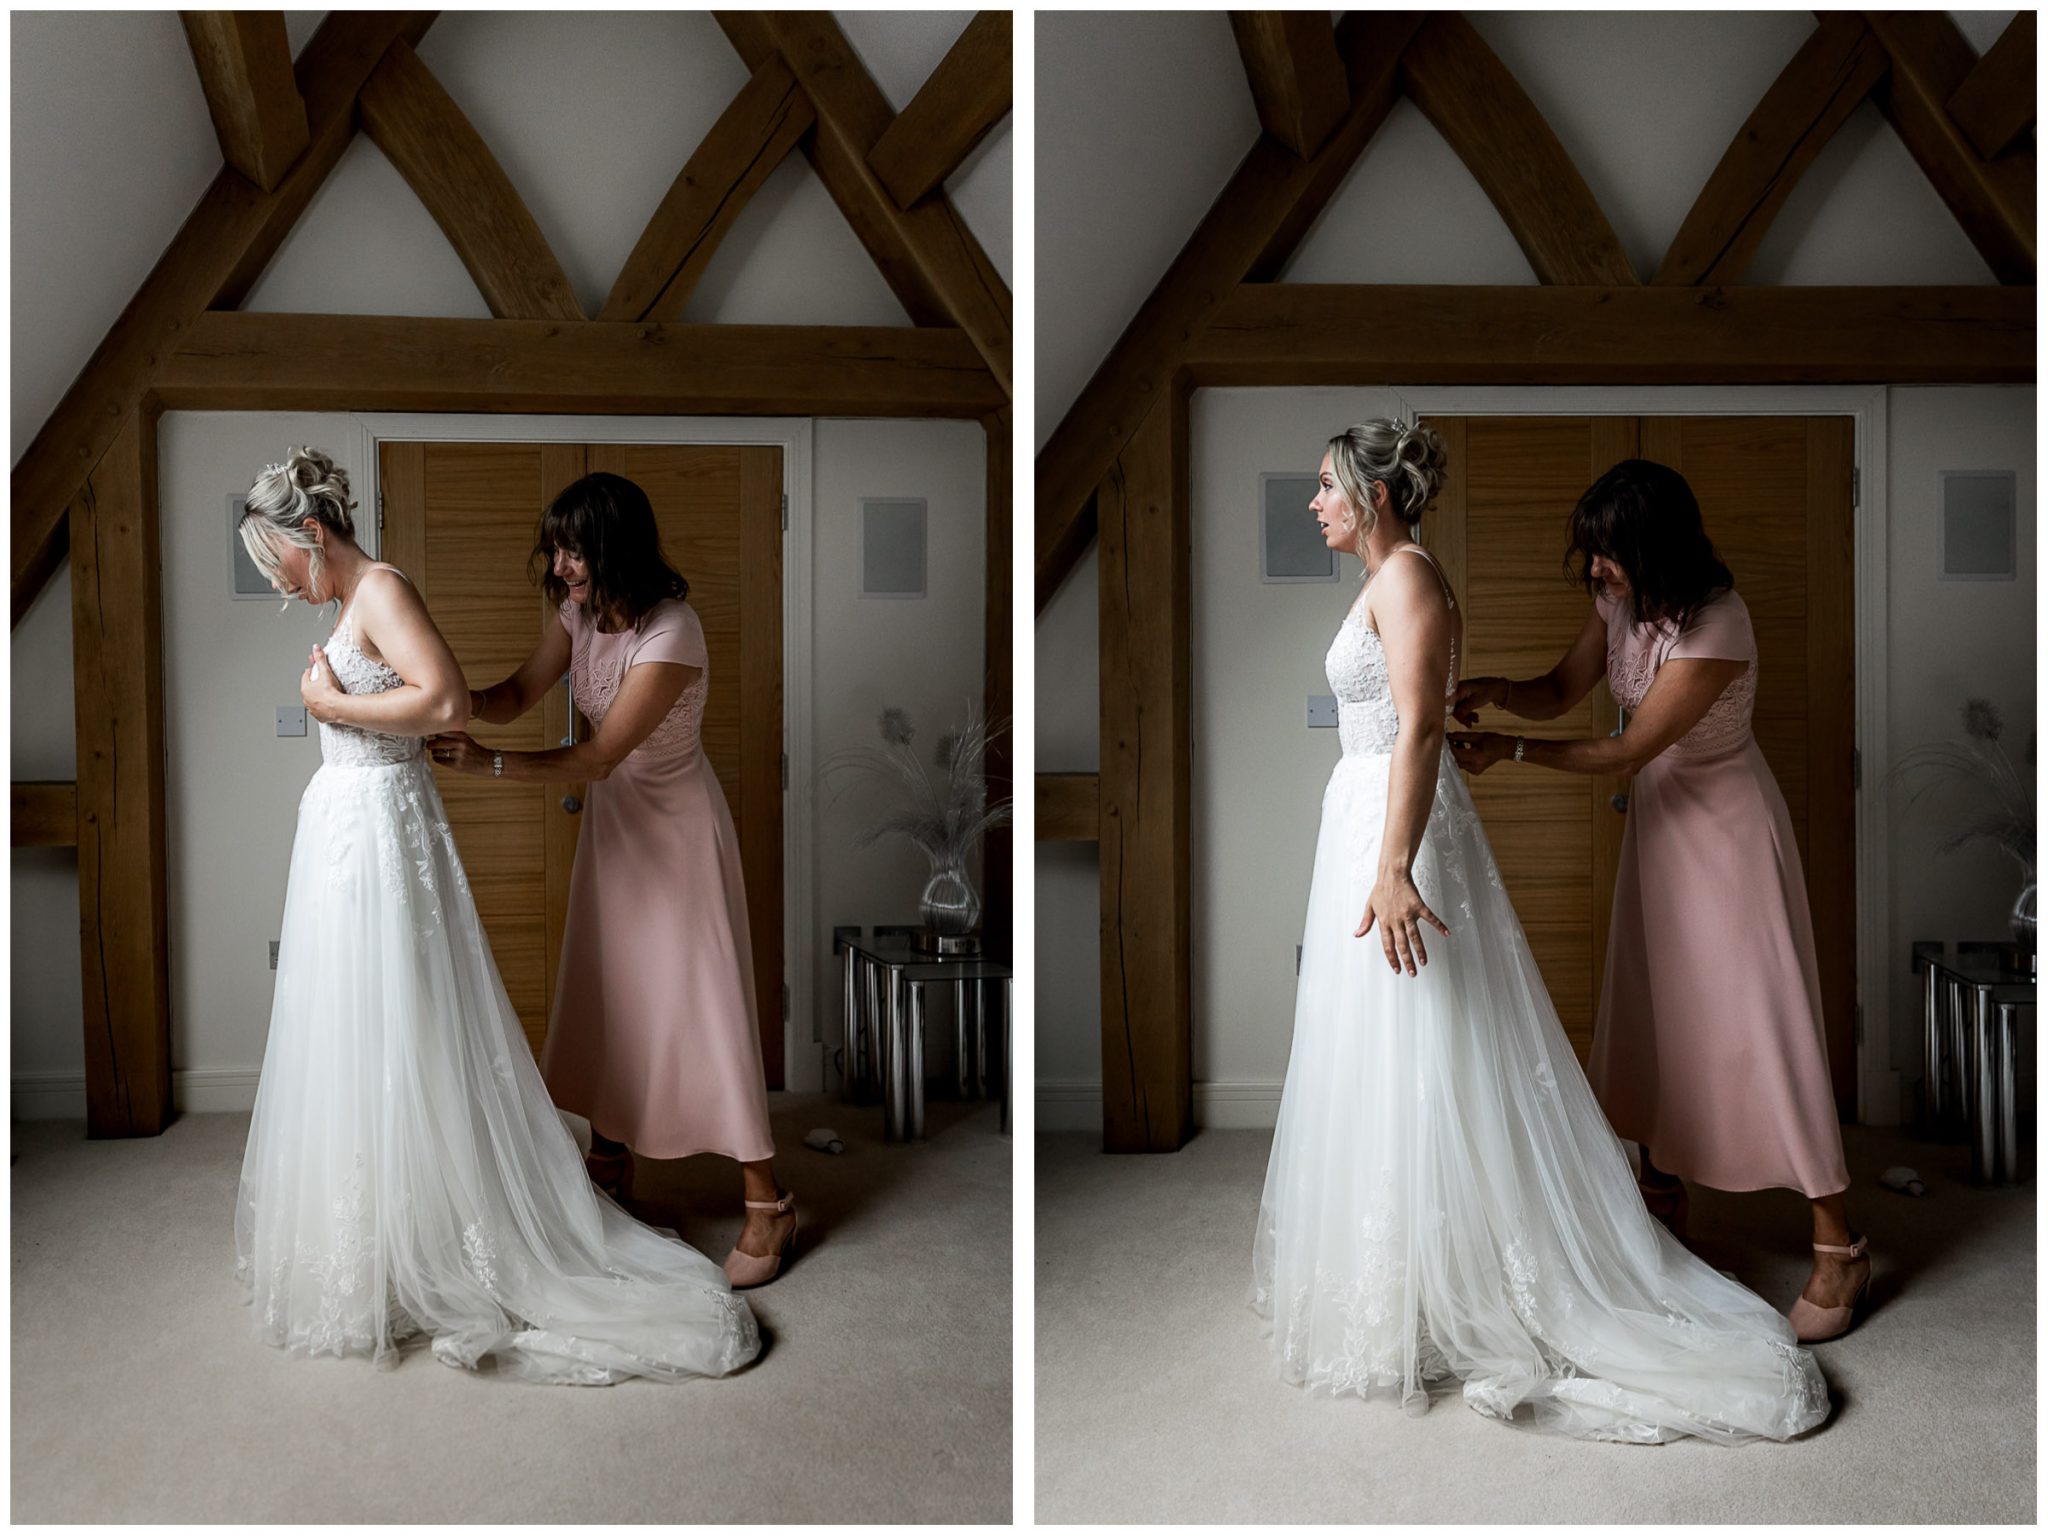 The bride's mother helps the bride into her wedding dress